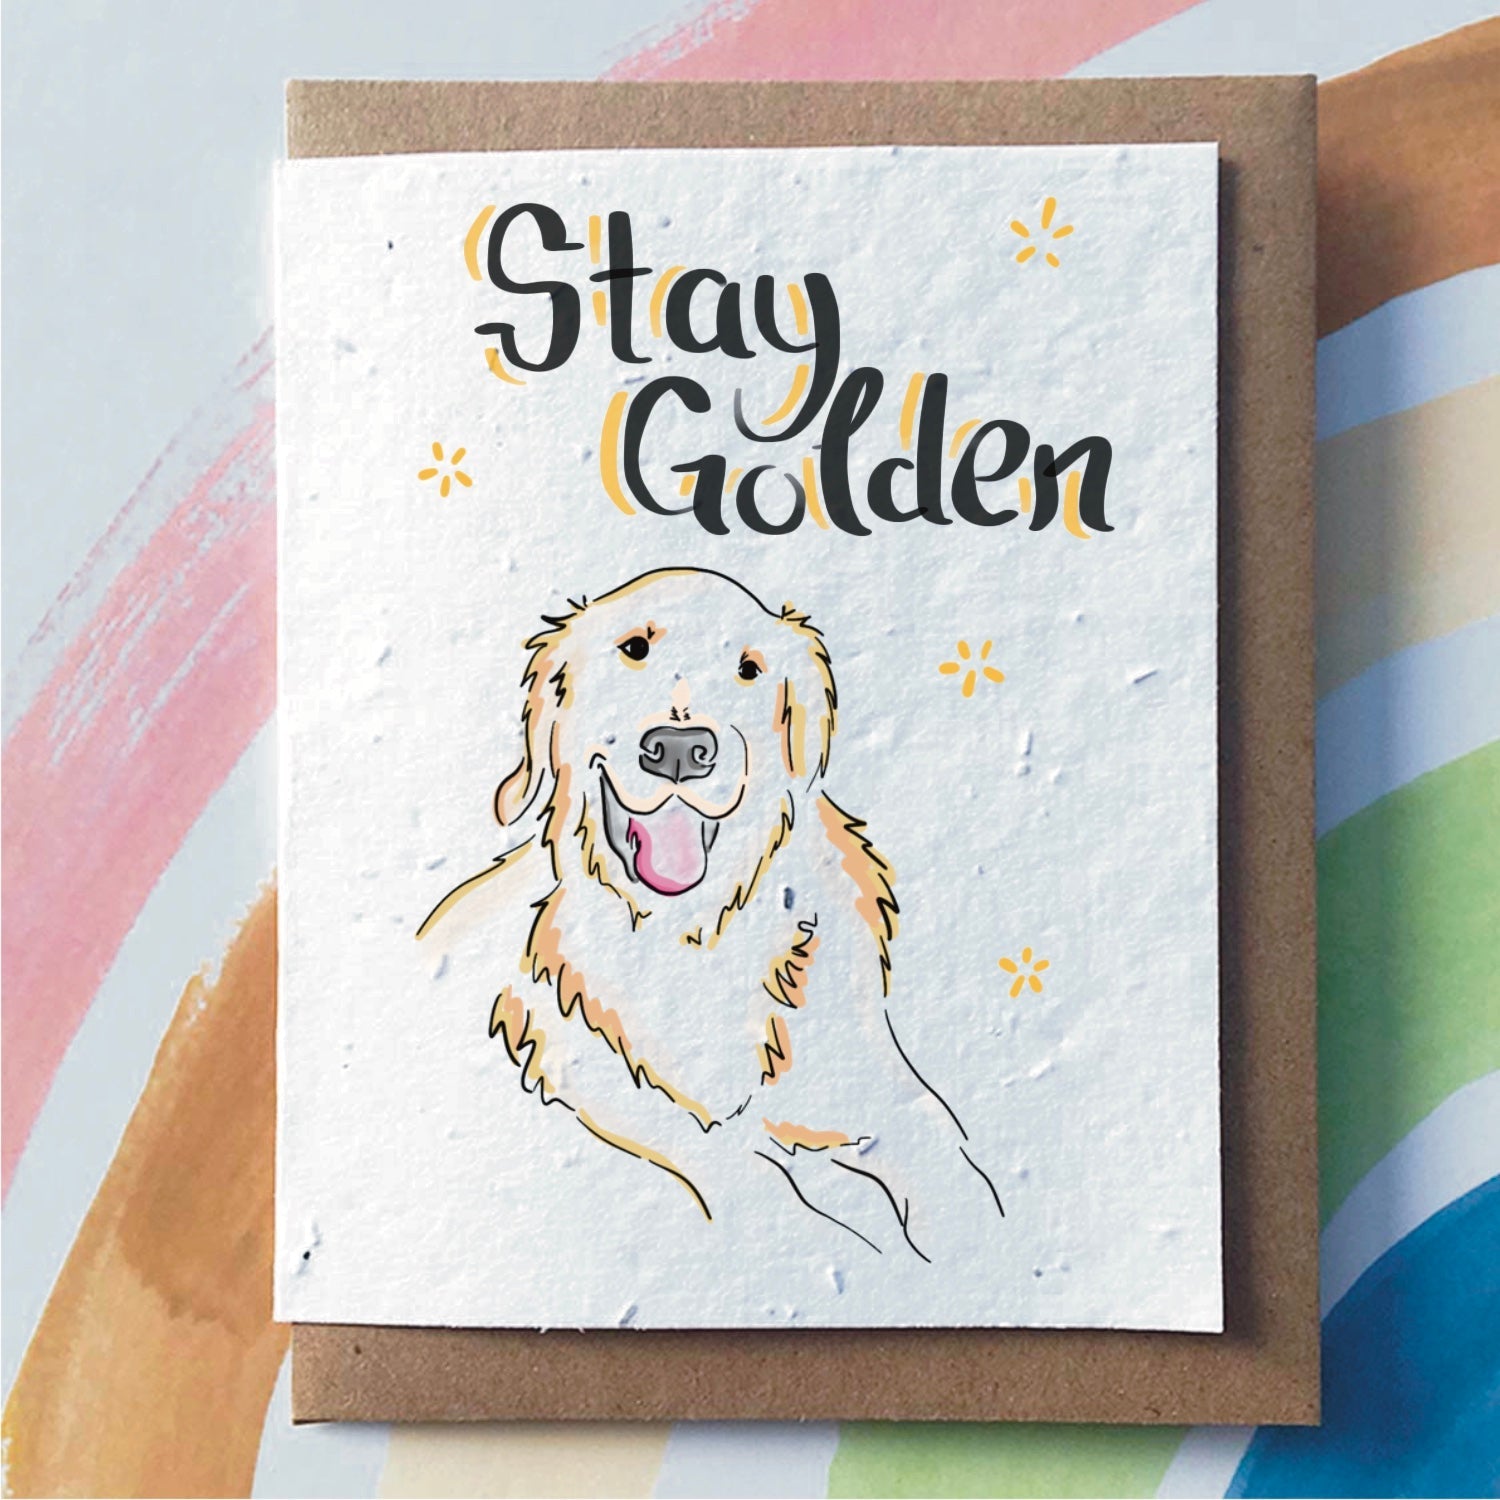 SowSweet Greetings Cards - Stay Golden